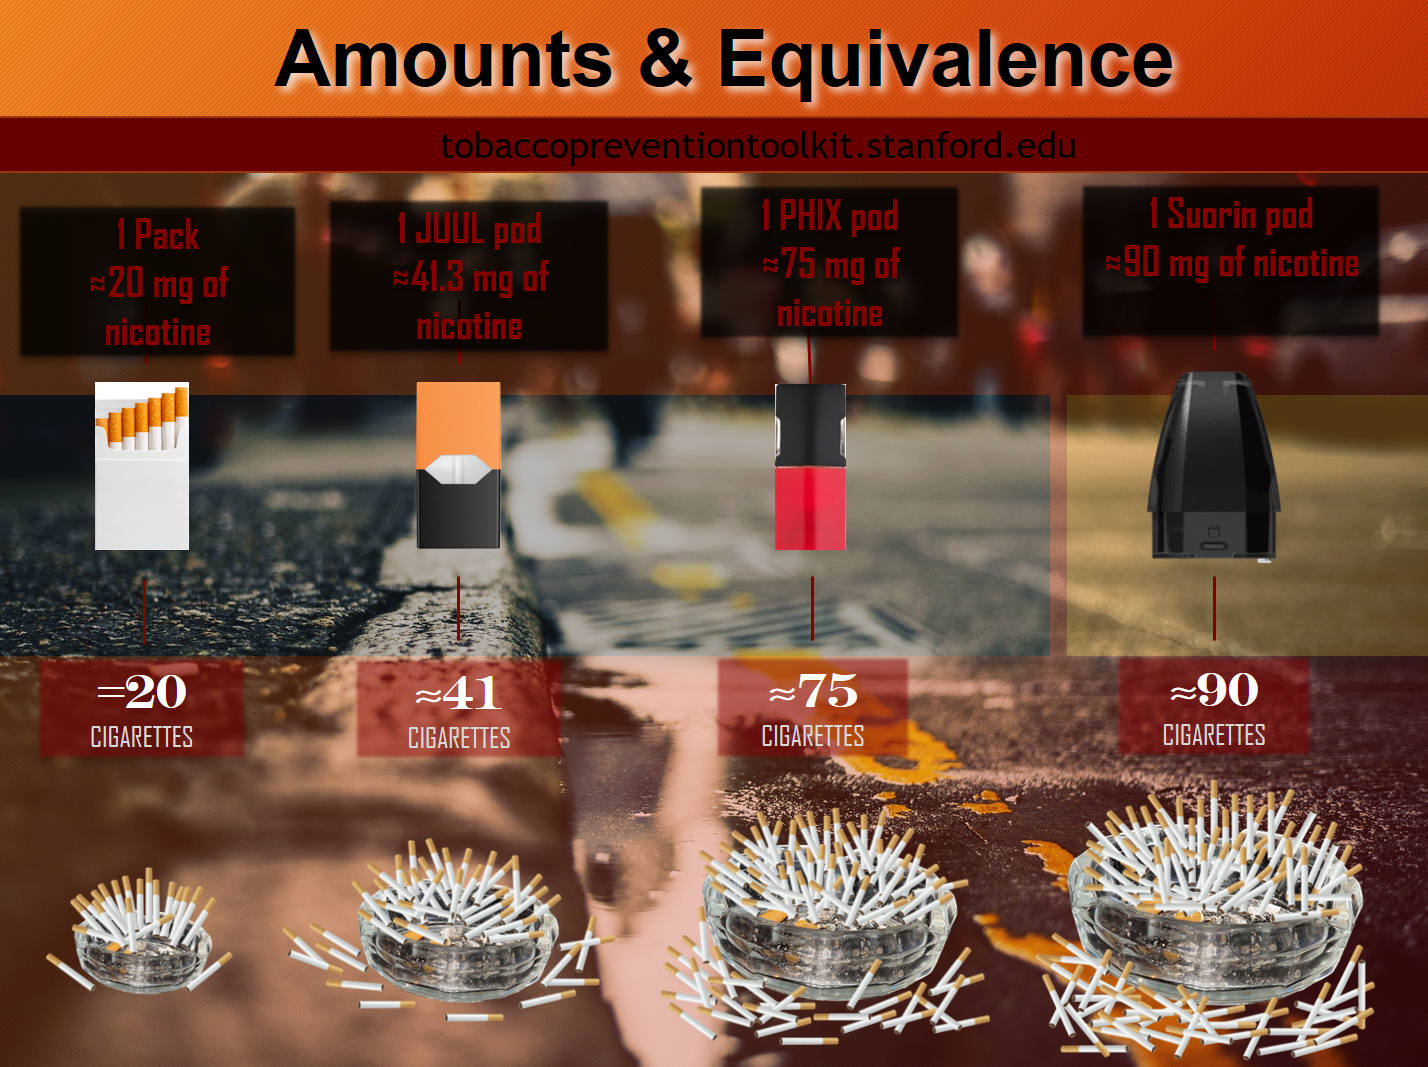 Amounts and Equivalence; tobaccopreventiontoolkit.stanford.edu